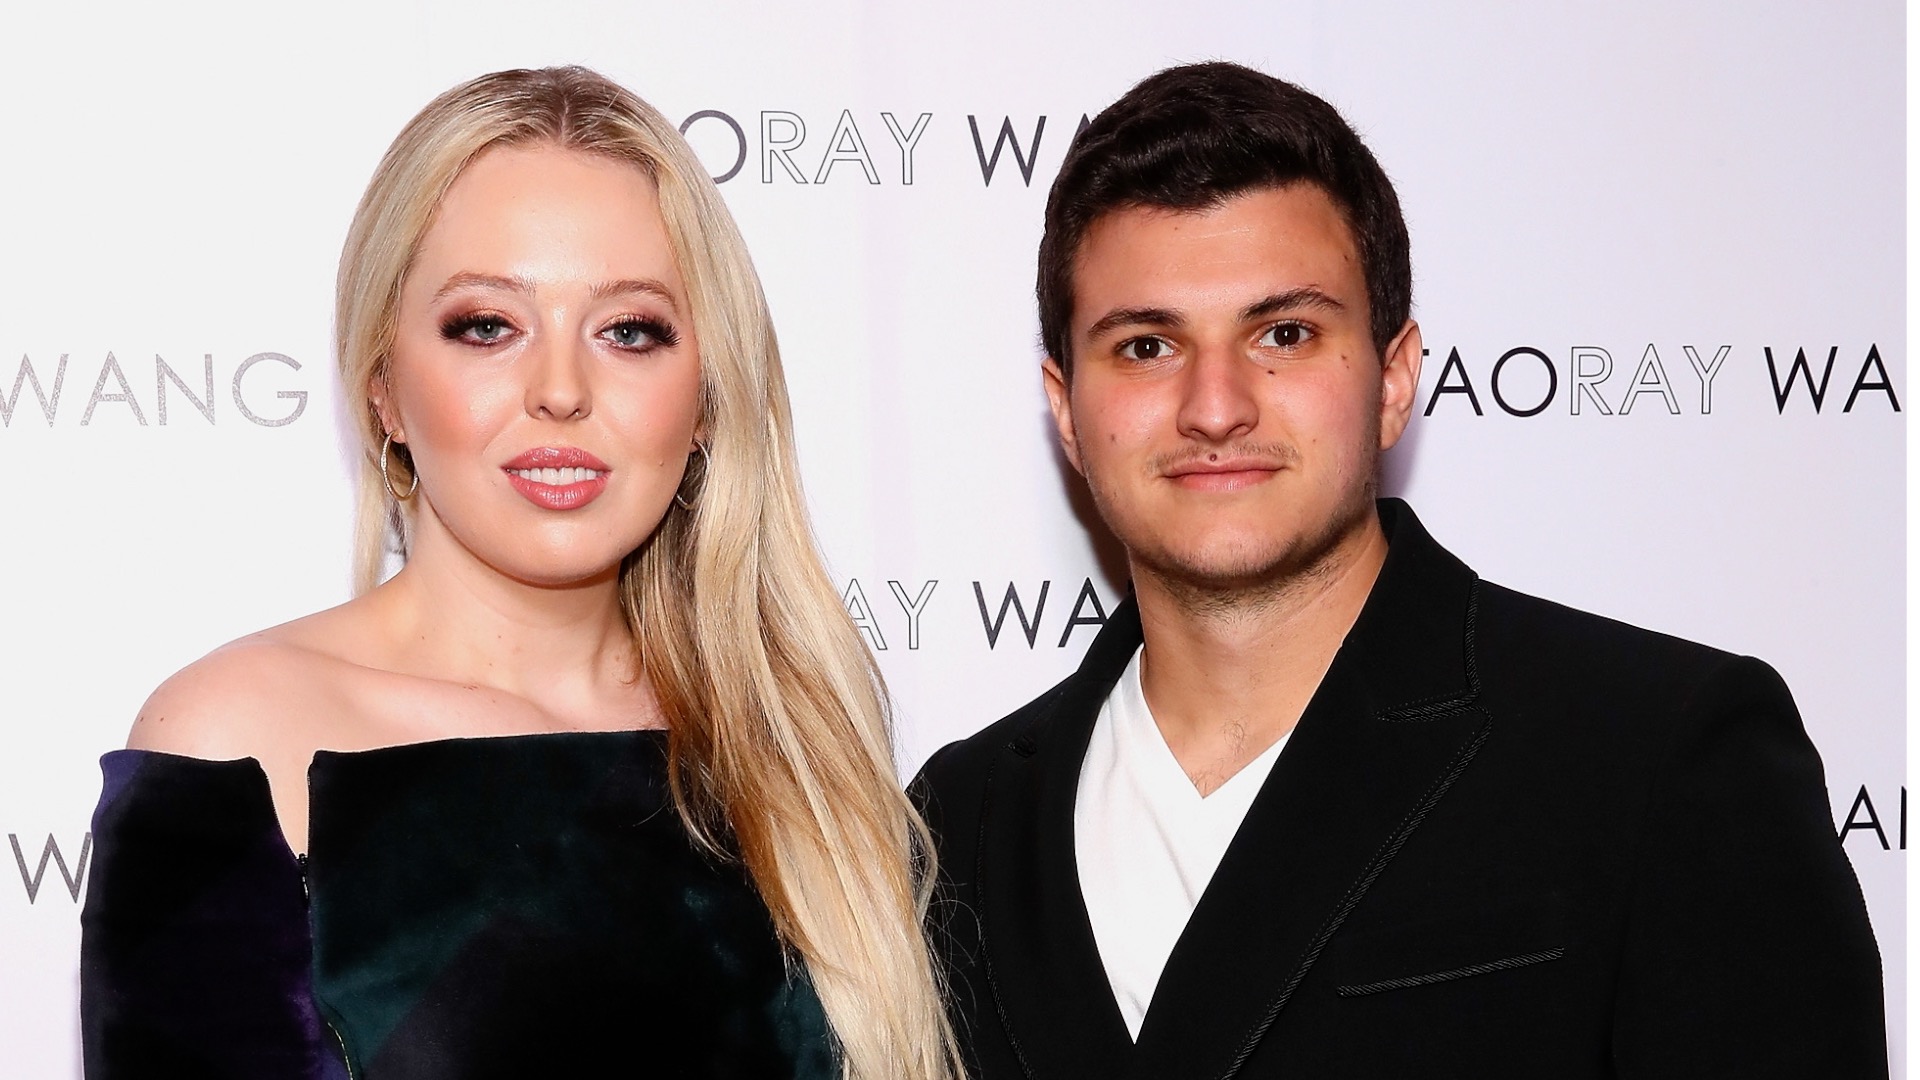 Tiffany Trump Announces Engagement to Business Executive Michael Boulos